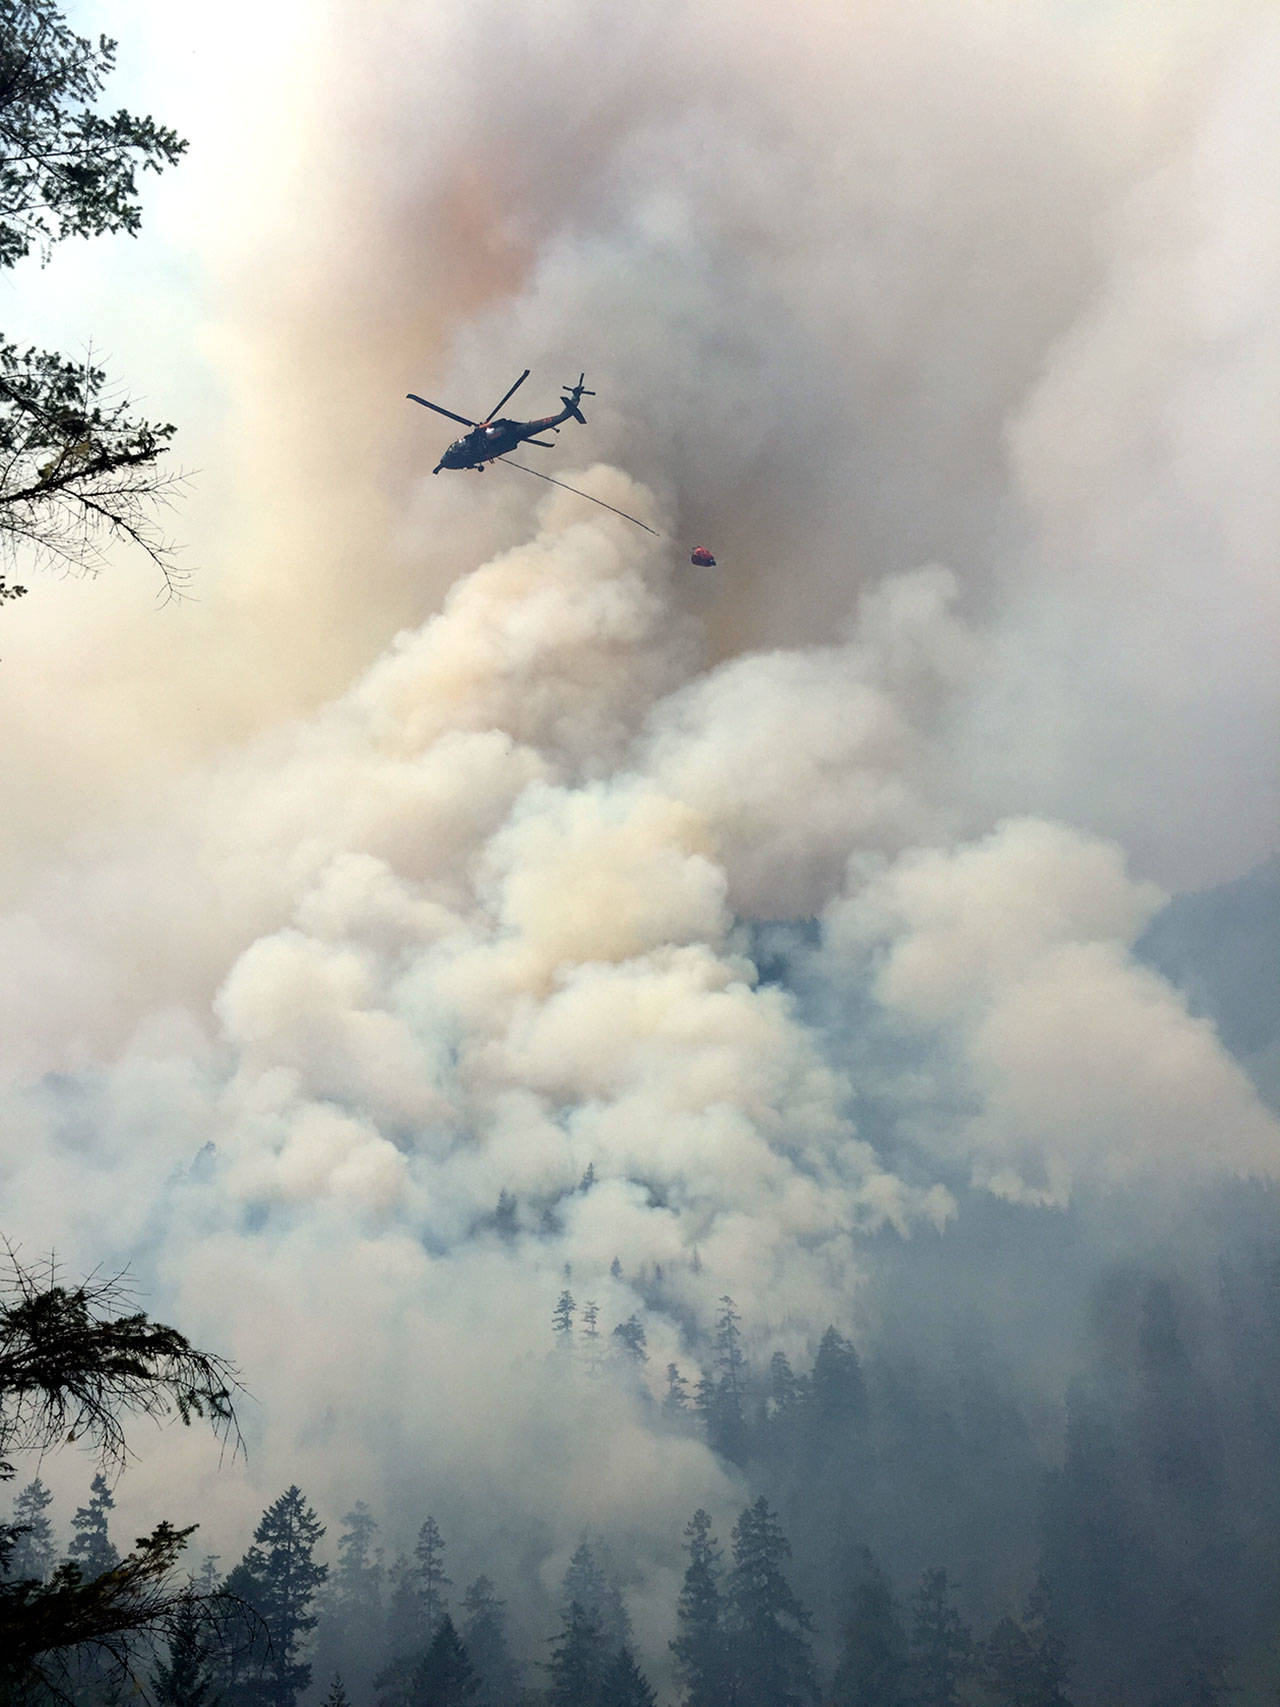 A National Guard helicopter douses the Maple Fire in August 2018. (State Department of Natural Resources)